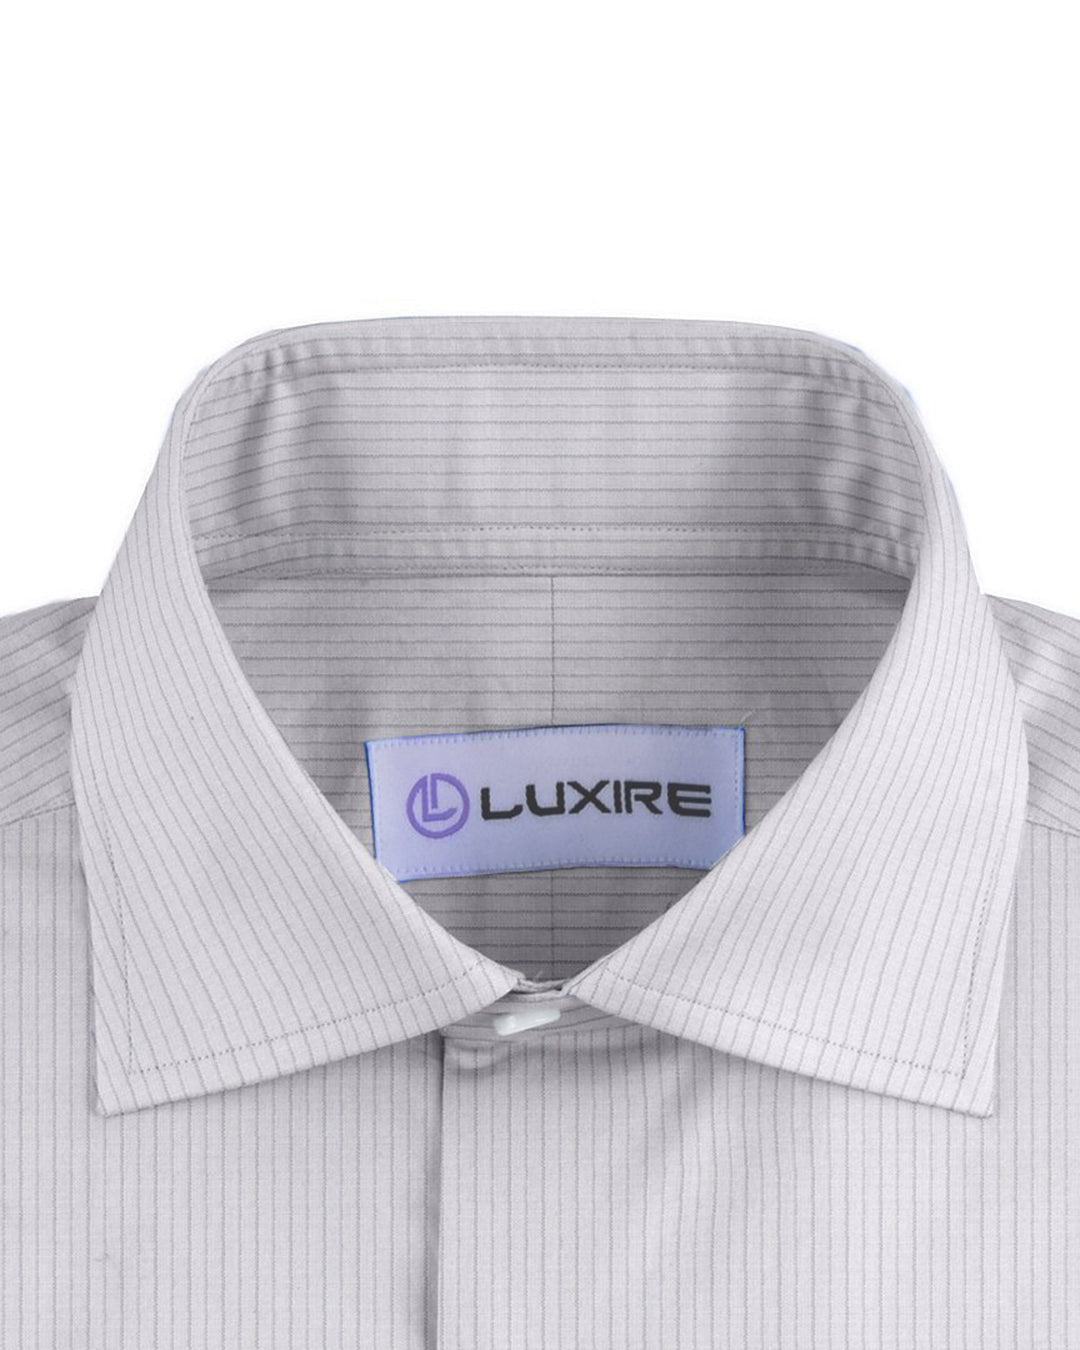 Collar of the custom linen shirt for men in grey pinstripes by Luxire Clothing